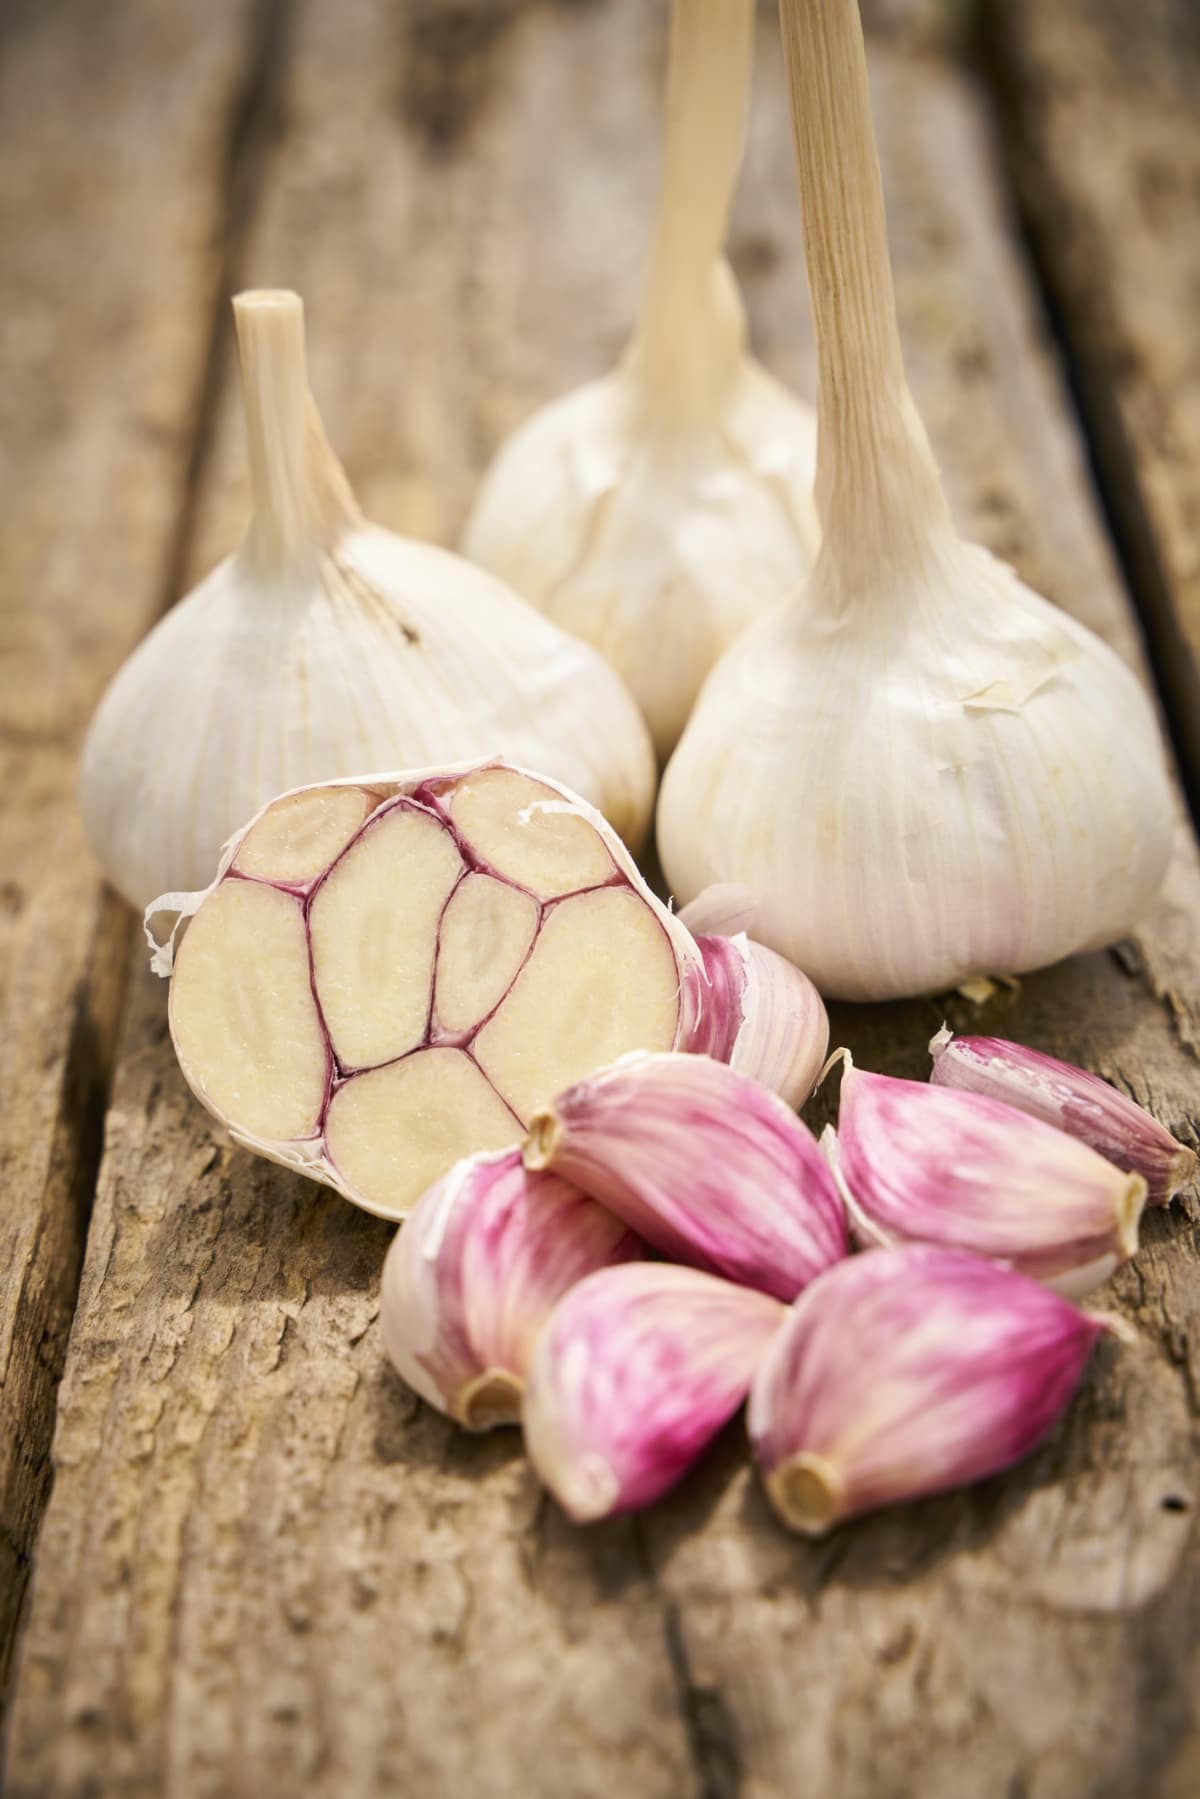 Several bulbs of garlic and garlic cloves on a wooden surface